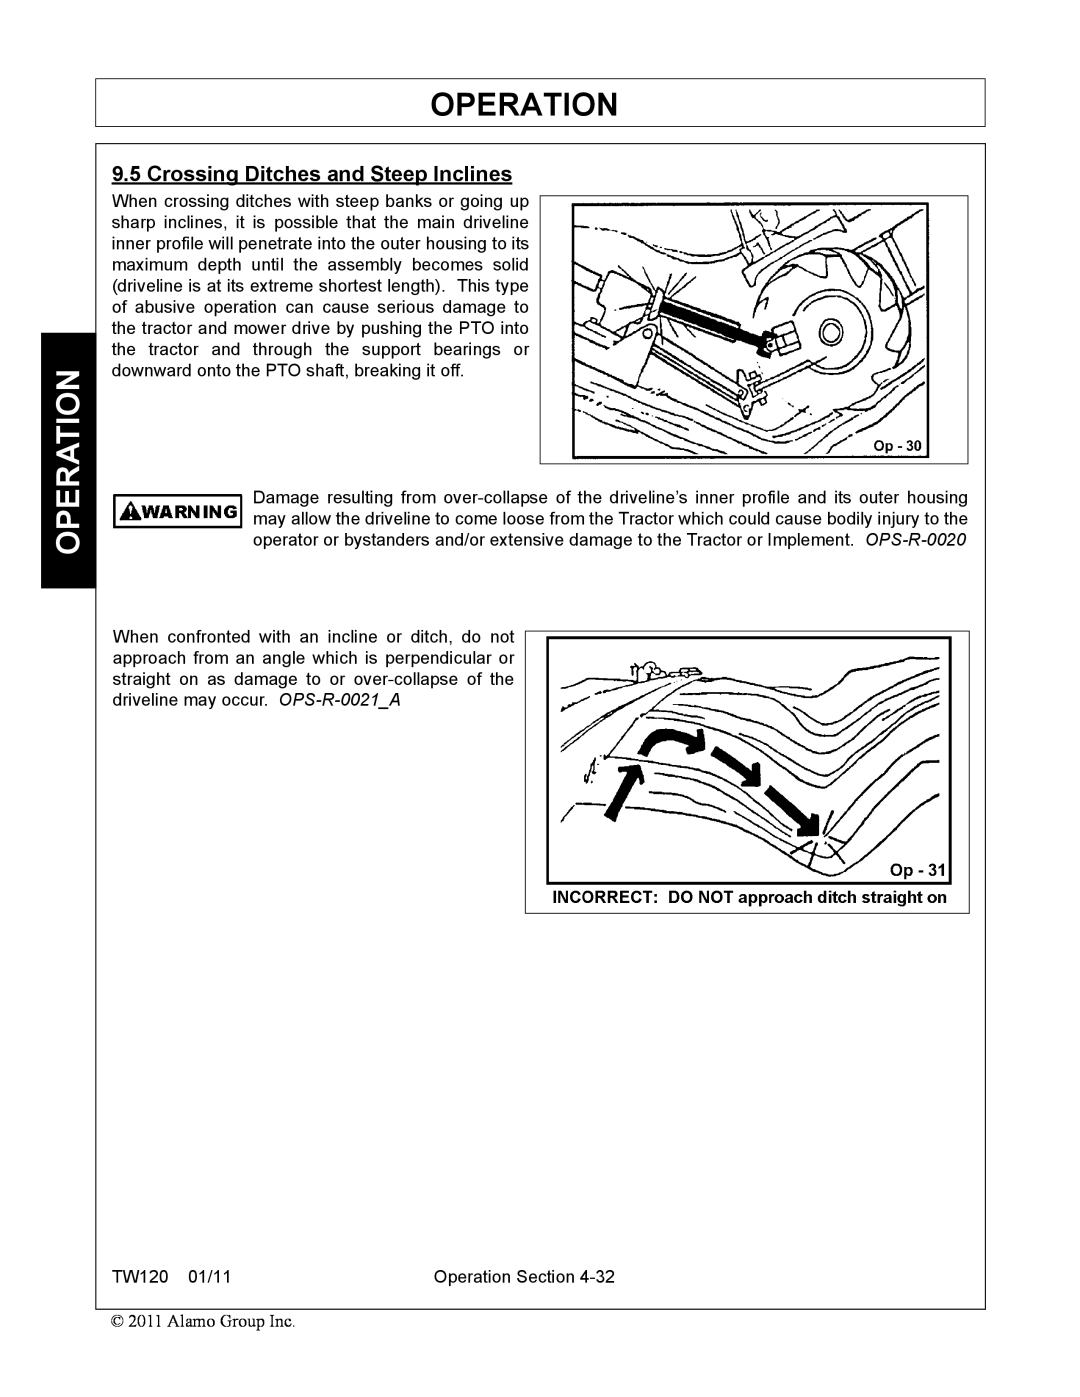 Blue Rhino FC-0024, FC-0025 manual Operation, Crossing Ditches and Steep Inclines 